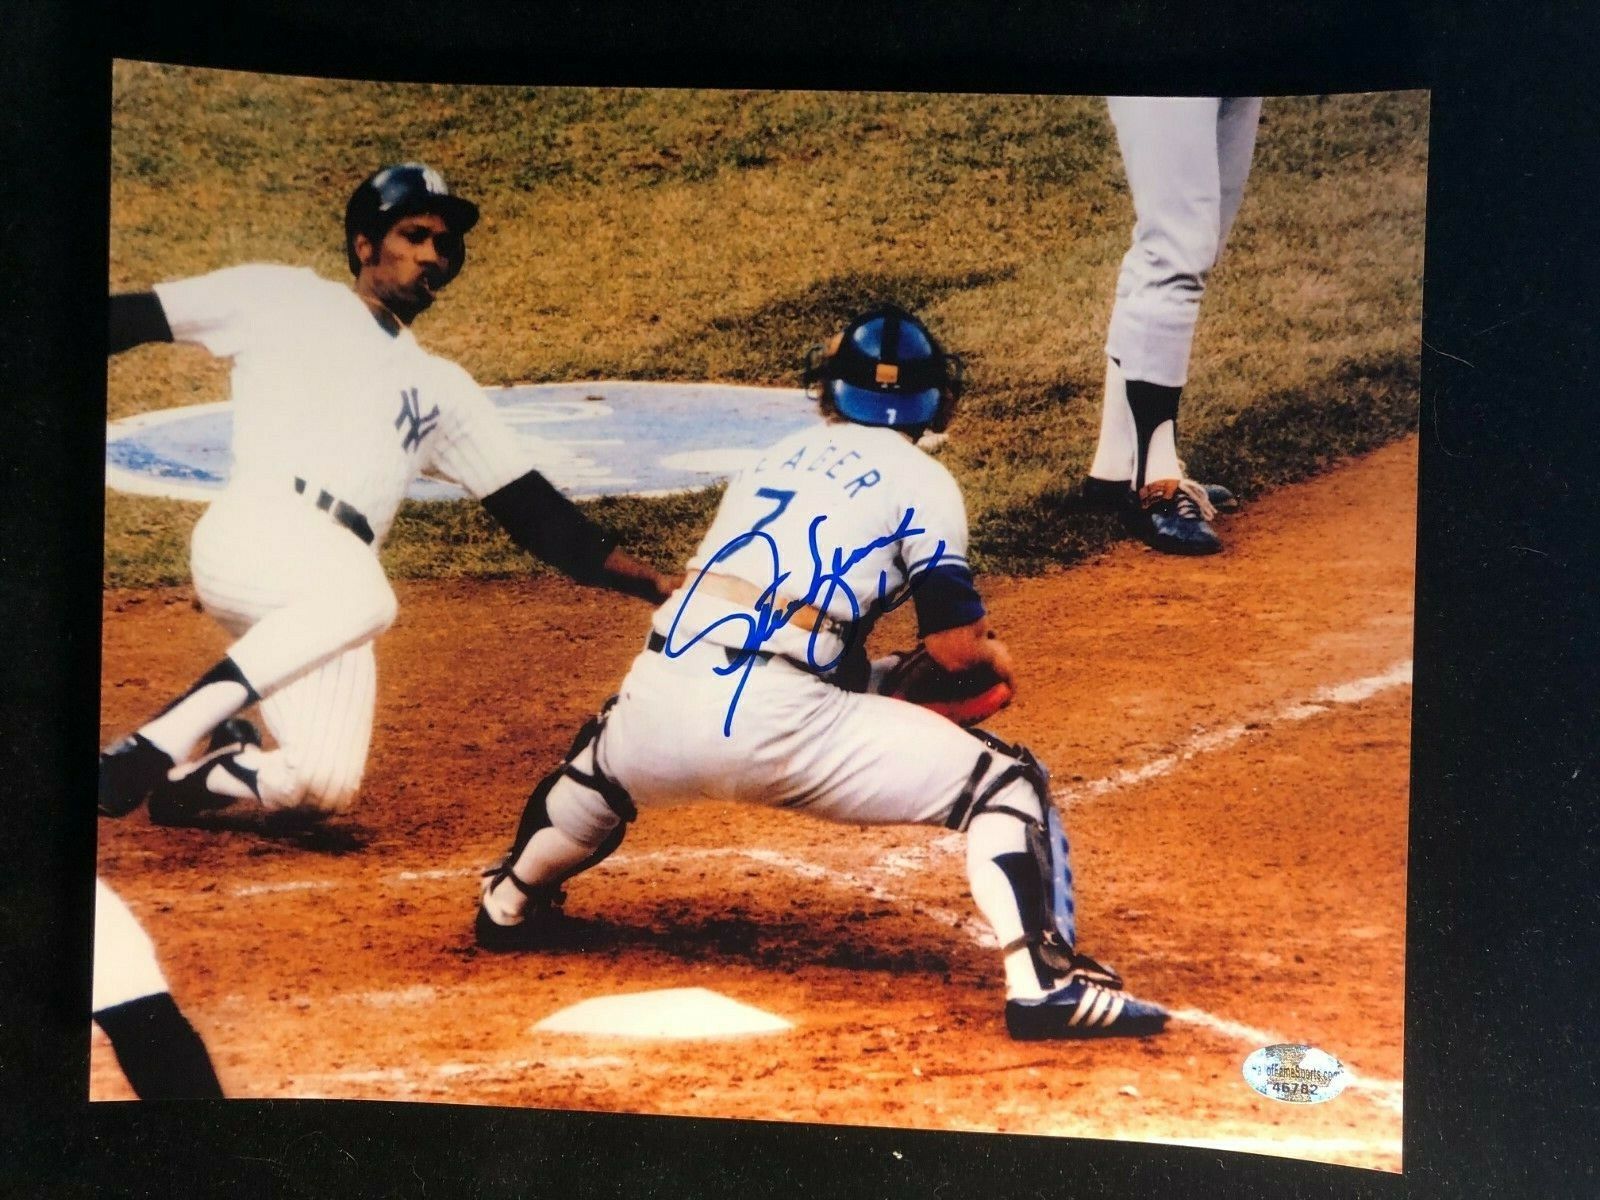 Steve Yeager Signed Autographed 1977 World Series Photo Poster painting COA Los Angeles Dodgers